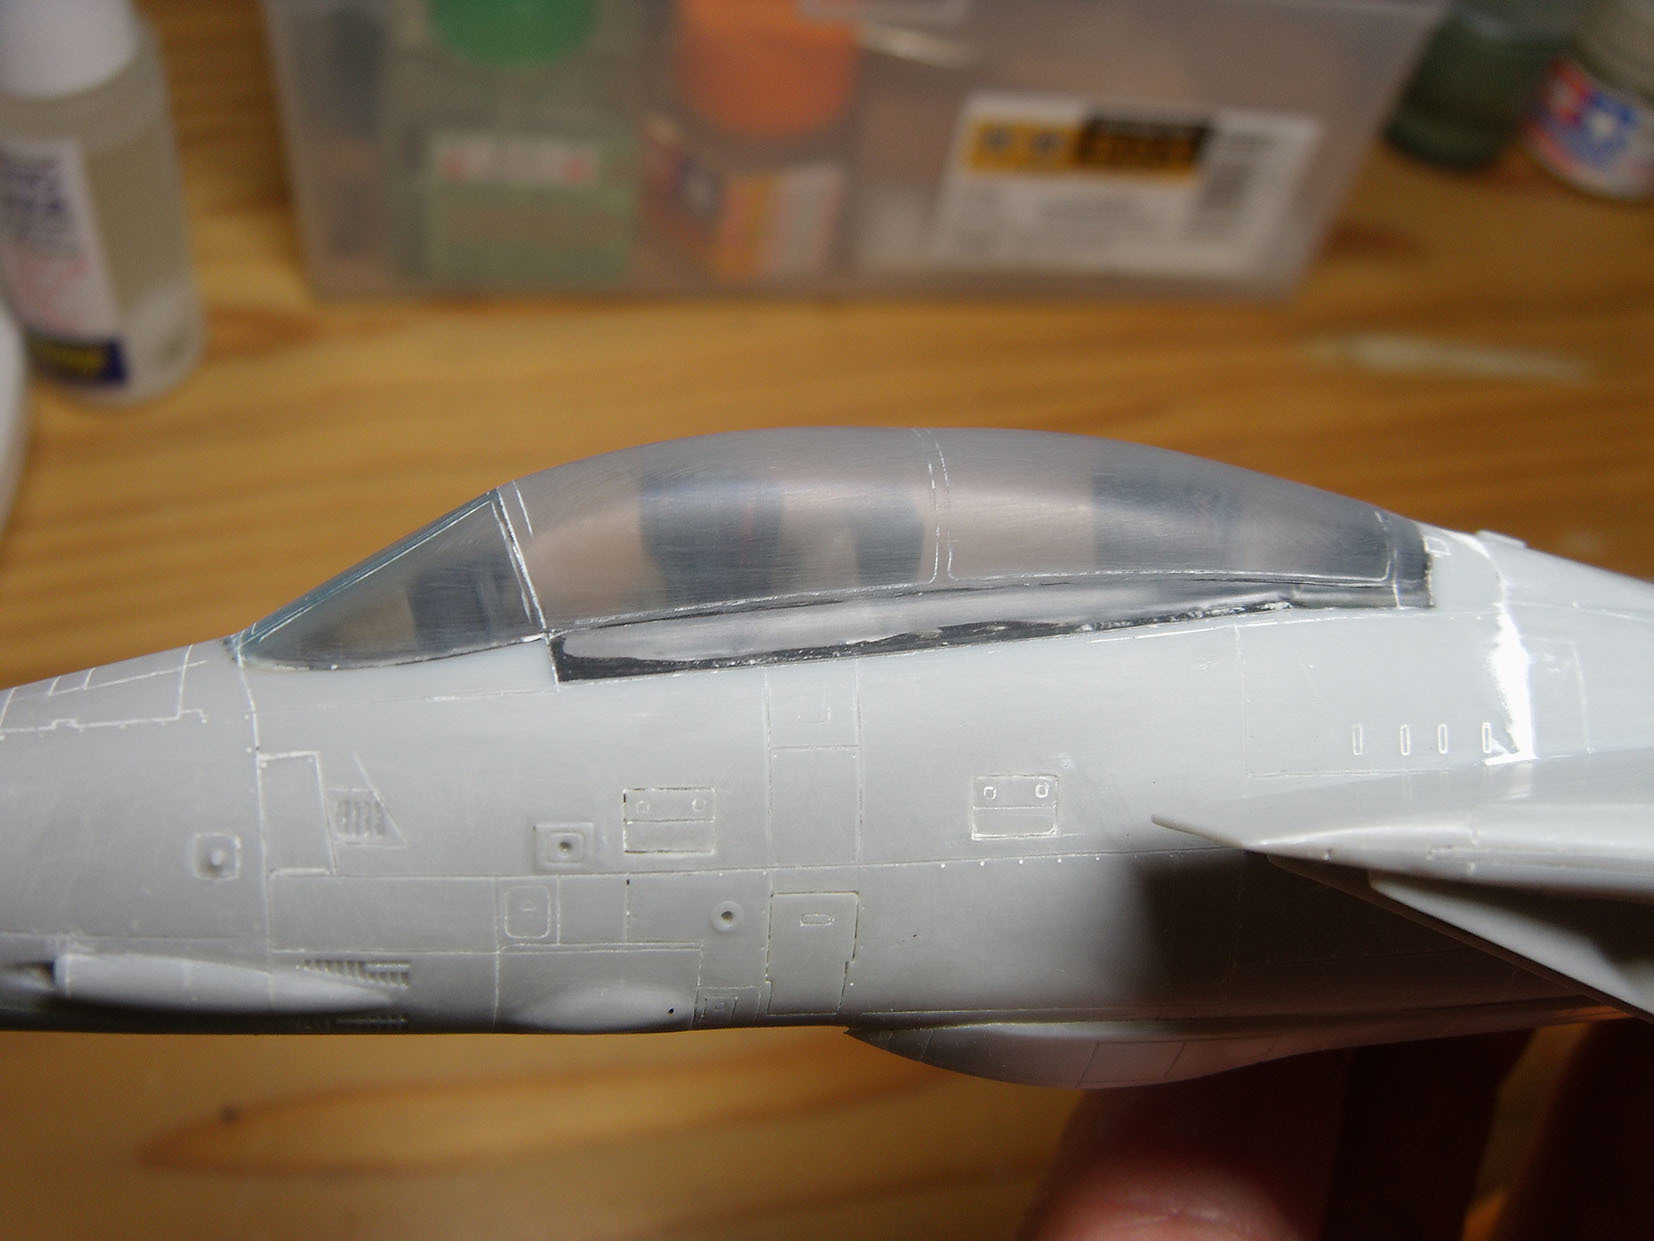 F-14A トムキャット（ハセガワ 1/72 新版）製作記 その9 - F-14A ハセガワ 1/72（新版）